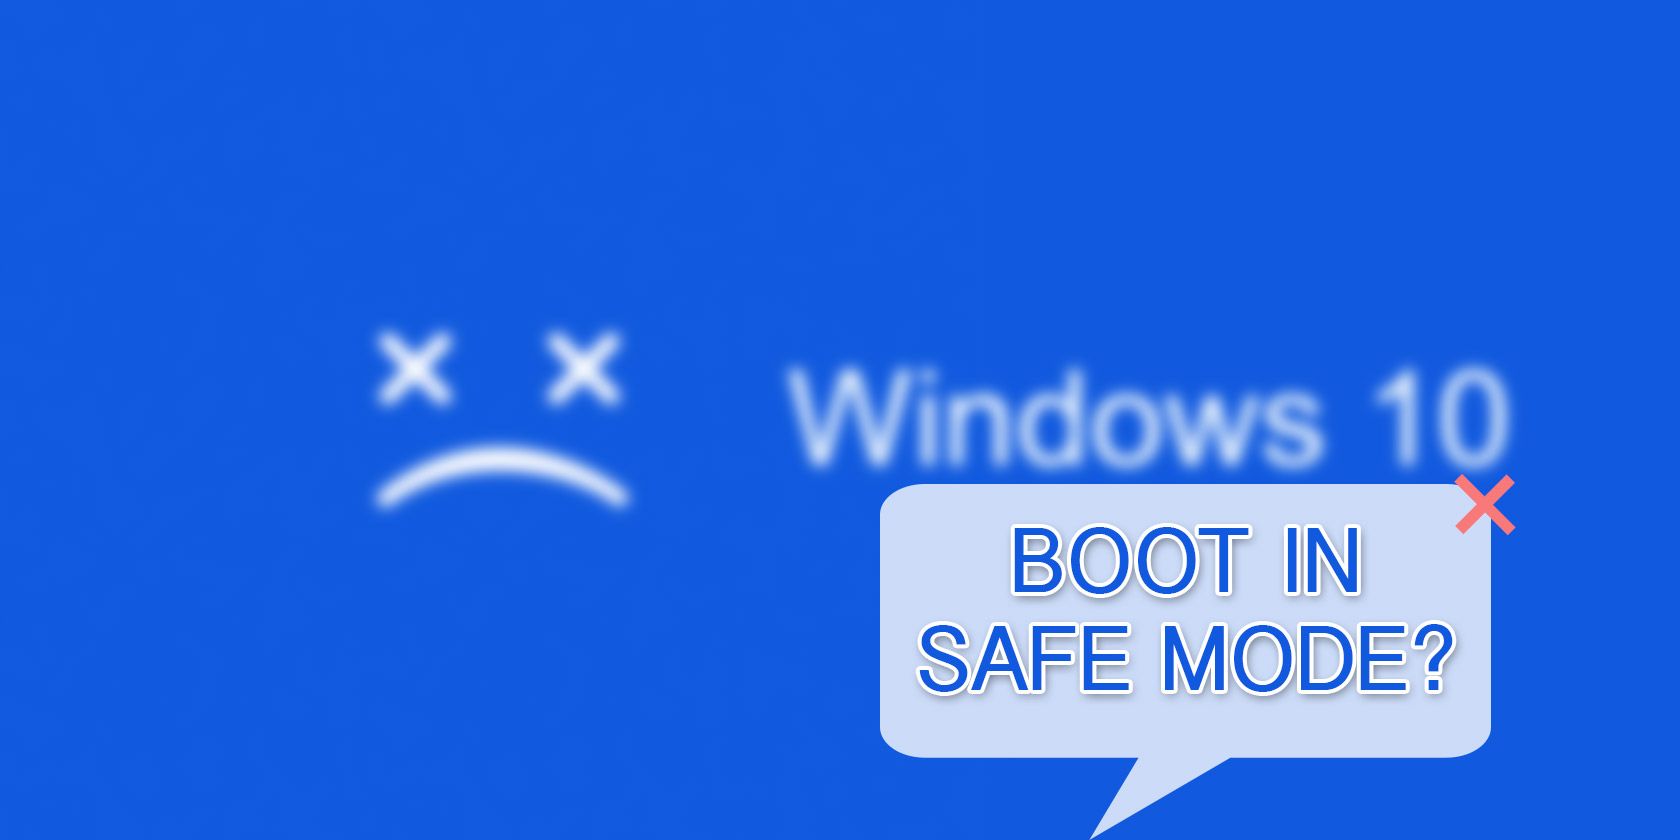 Windows 10 blue screen asking if you'd like to boot into safe mode